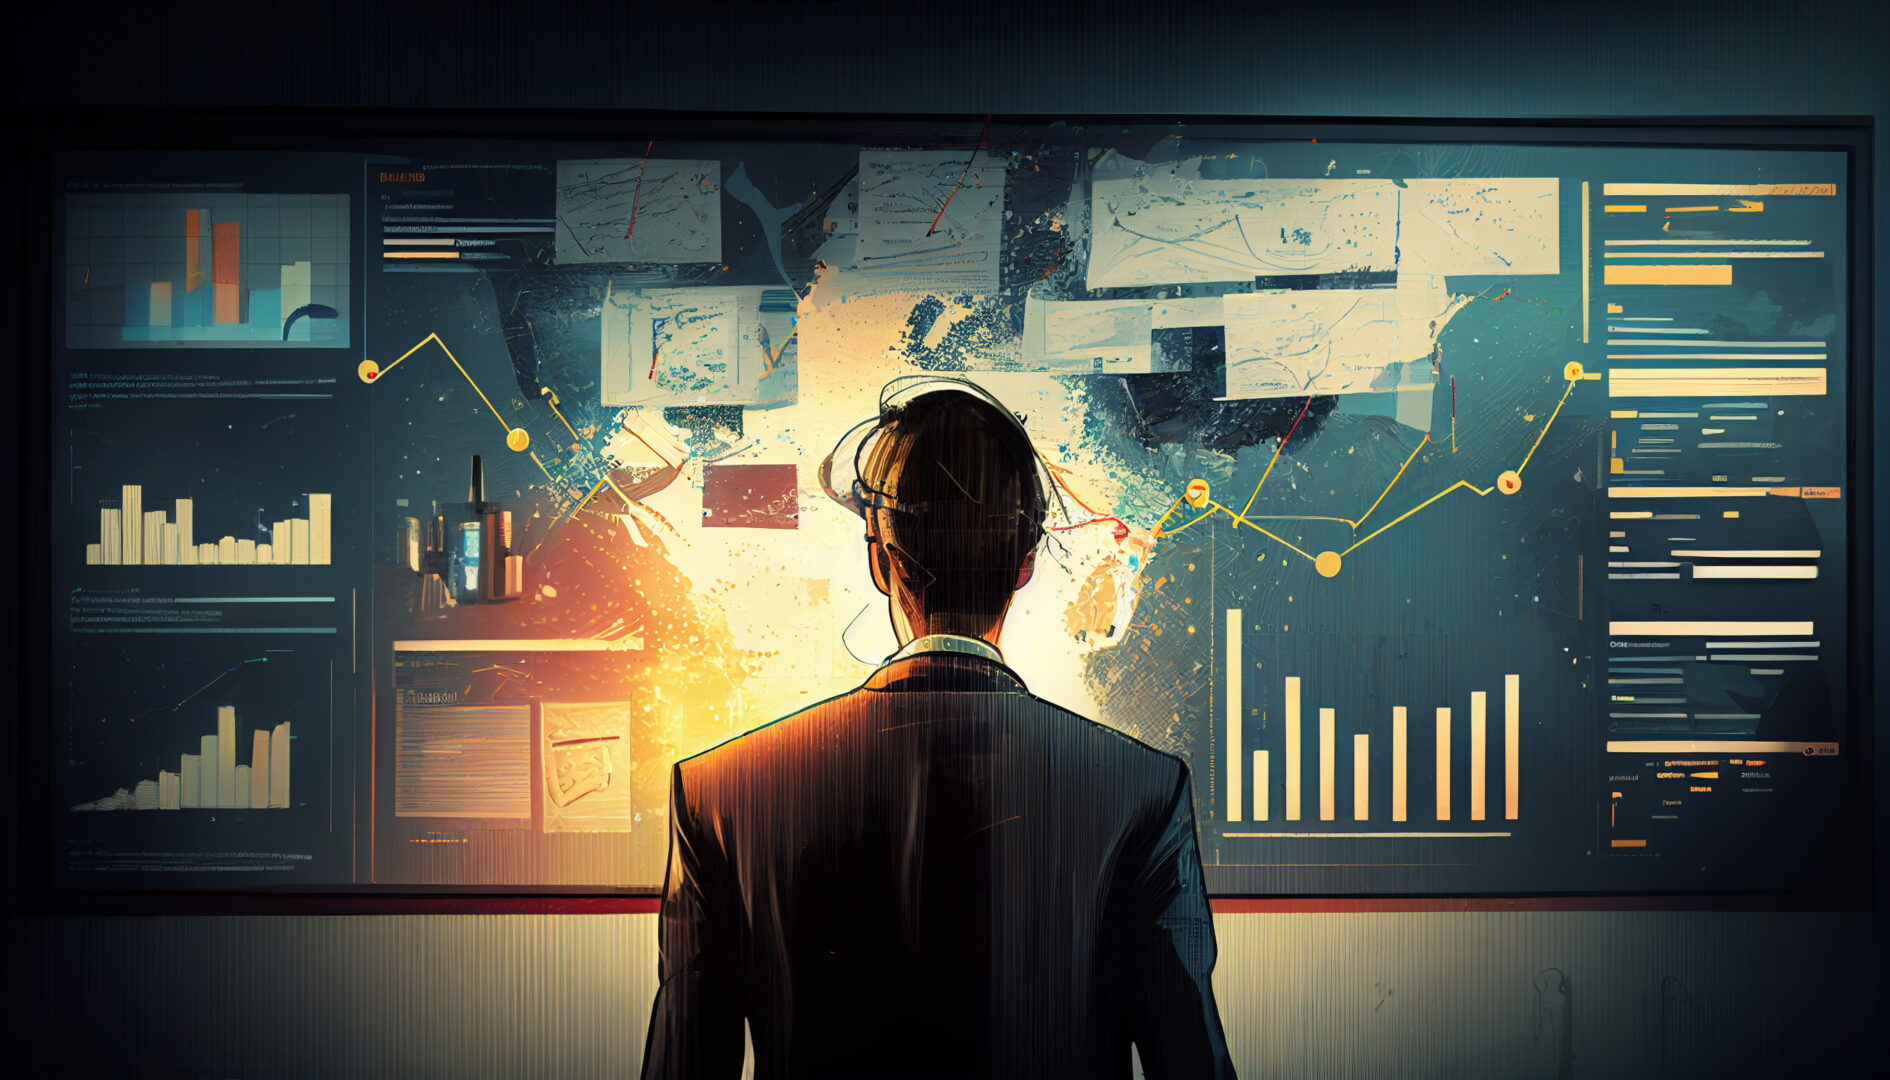 digital workspace with spatial computing Revelry blog. Business man standing in front of board with graphs and charts. Illustration.